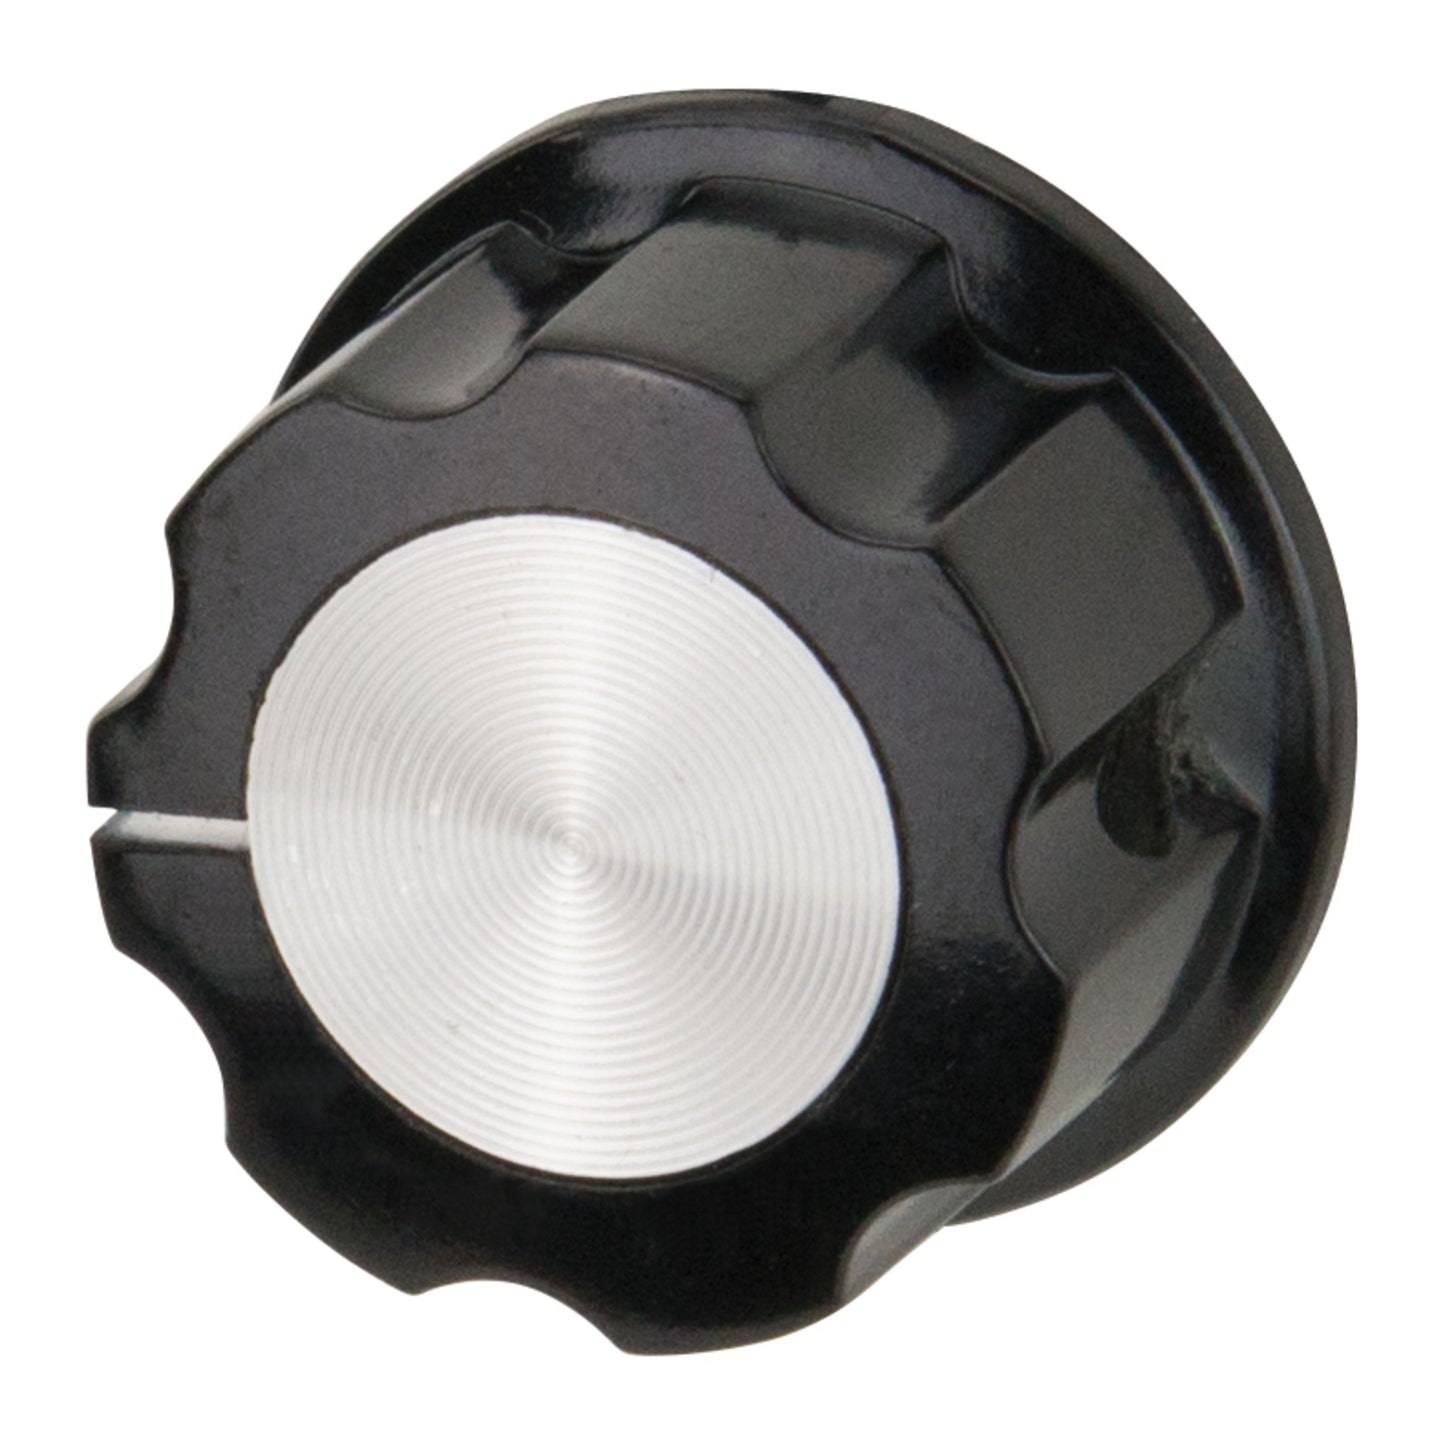 FWS500-P11 - Adjustable Knob for FW-S500 and FW-S800